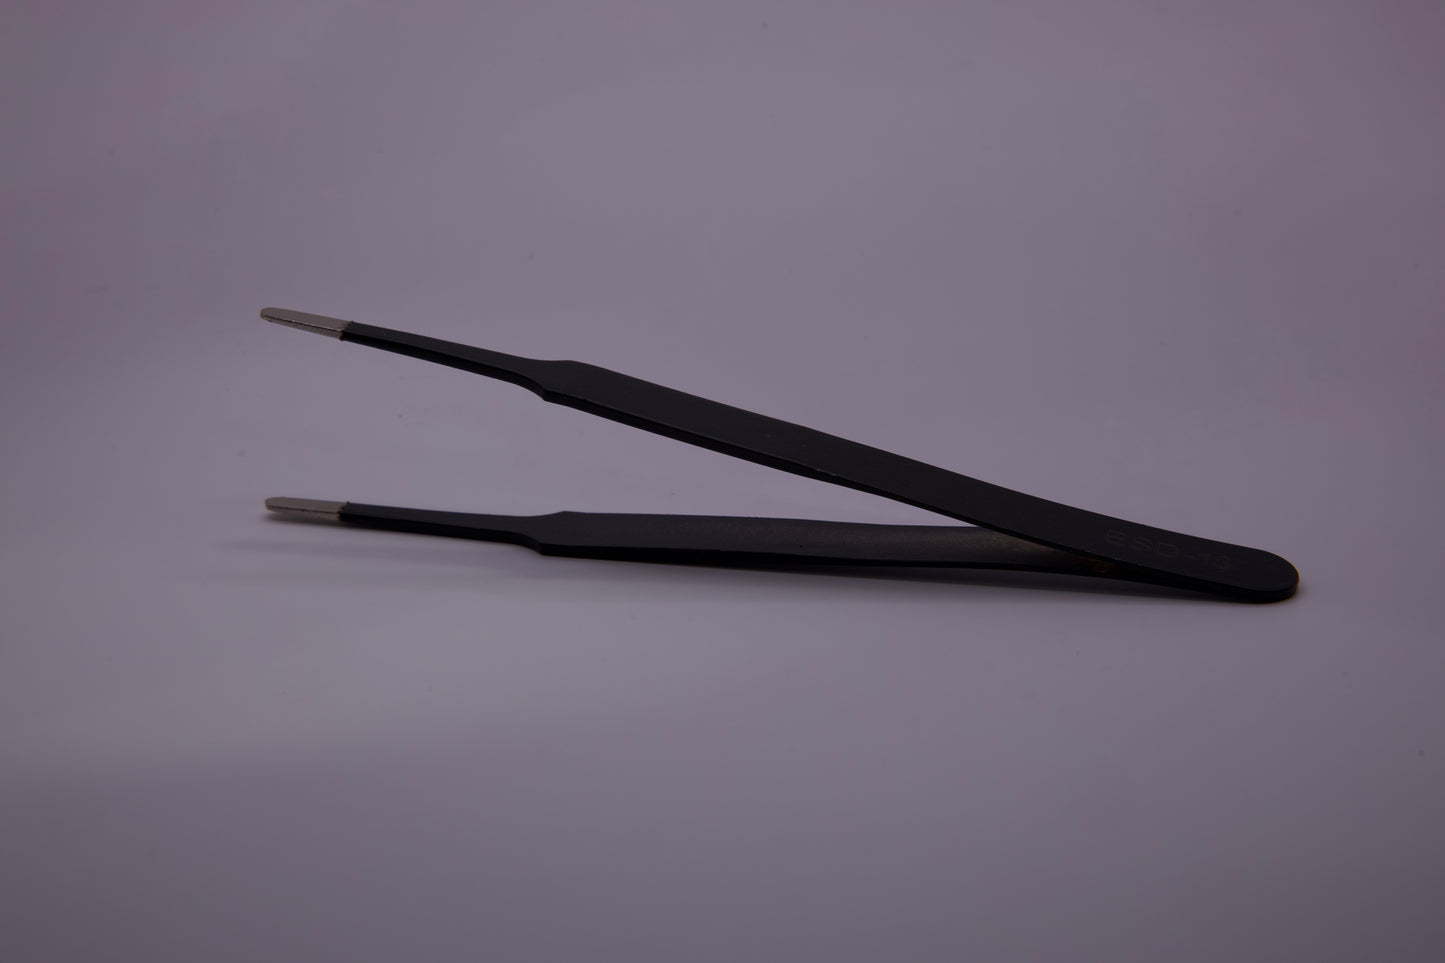 Professional Precision Tweezers extracting a dust particle from wrap film.